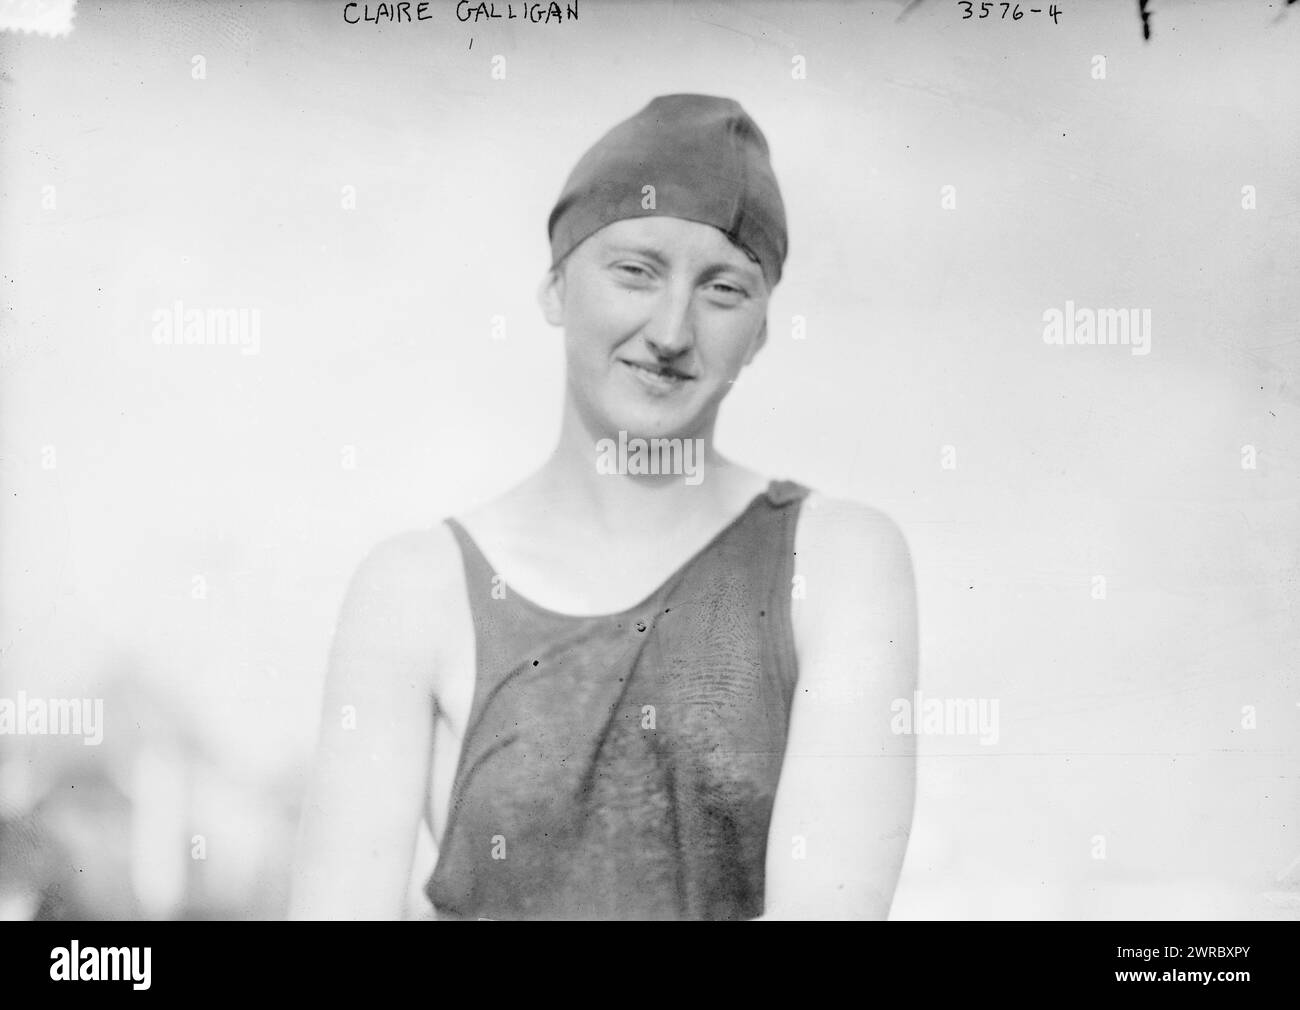 Claire Galligan, Photograph shows swimmer Claire Galligan who won the 220 yard contest for the National Women's Life Saving League in their annual event held on August 22, 1915 at Chisholm's Bathing Pavillion at Sheepshead Bay, Brooklyn, New York., 1915 Aug. 23, Glass negatives, 1 negative: glass Stock Photo